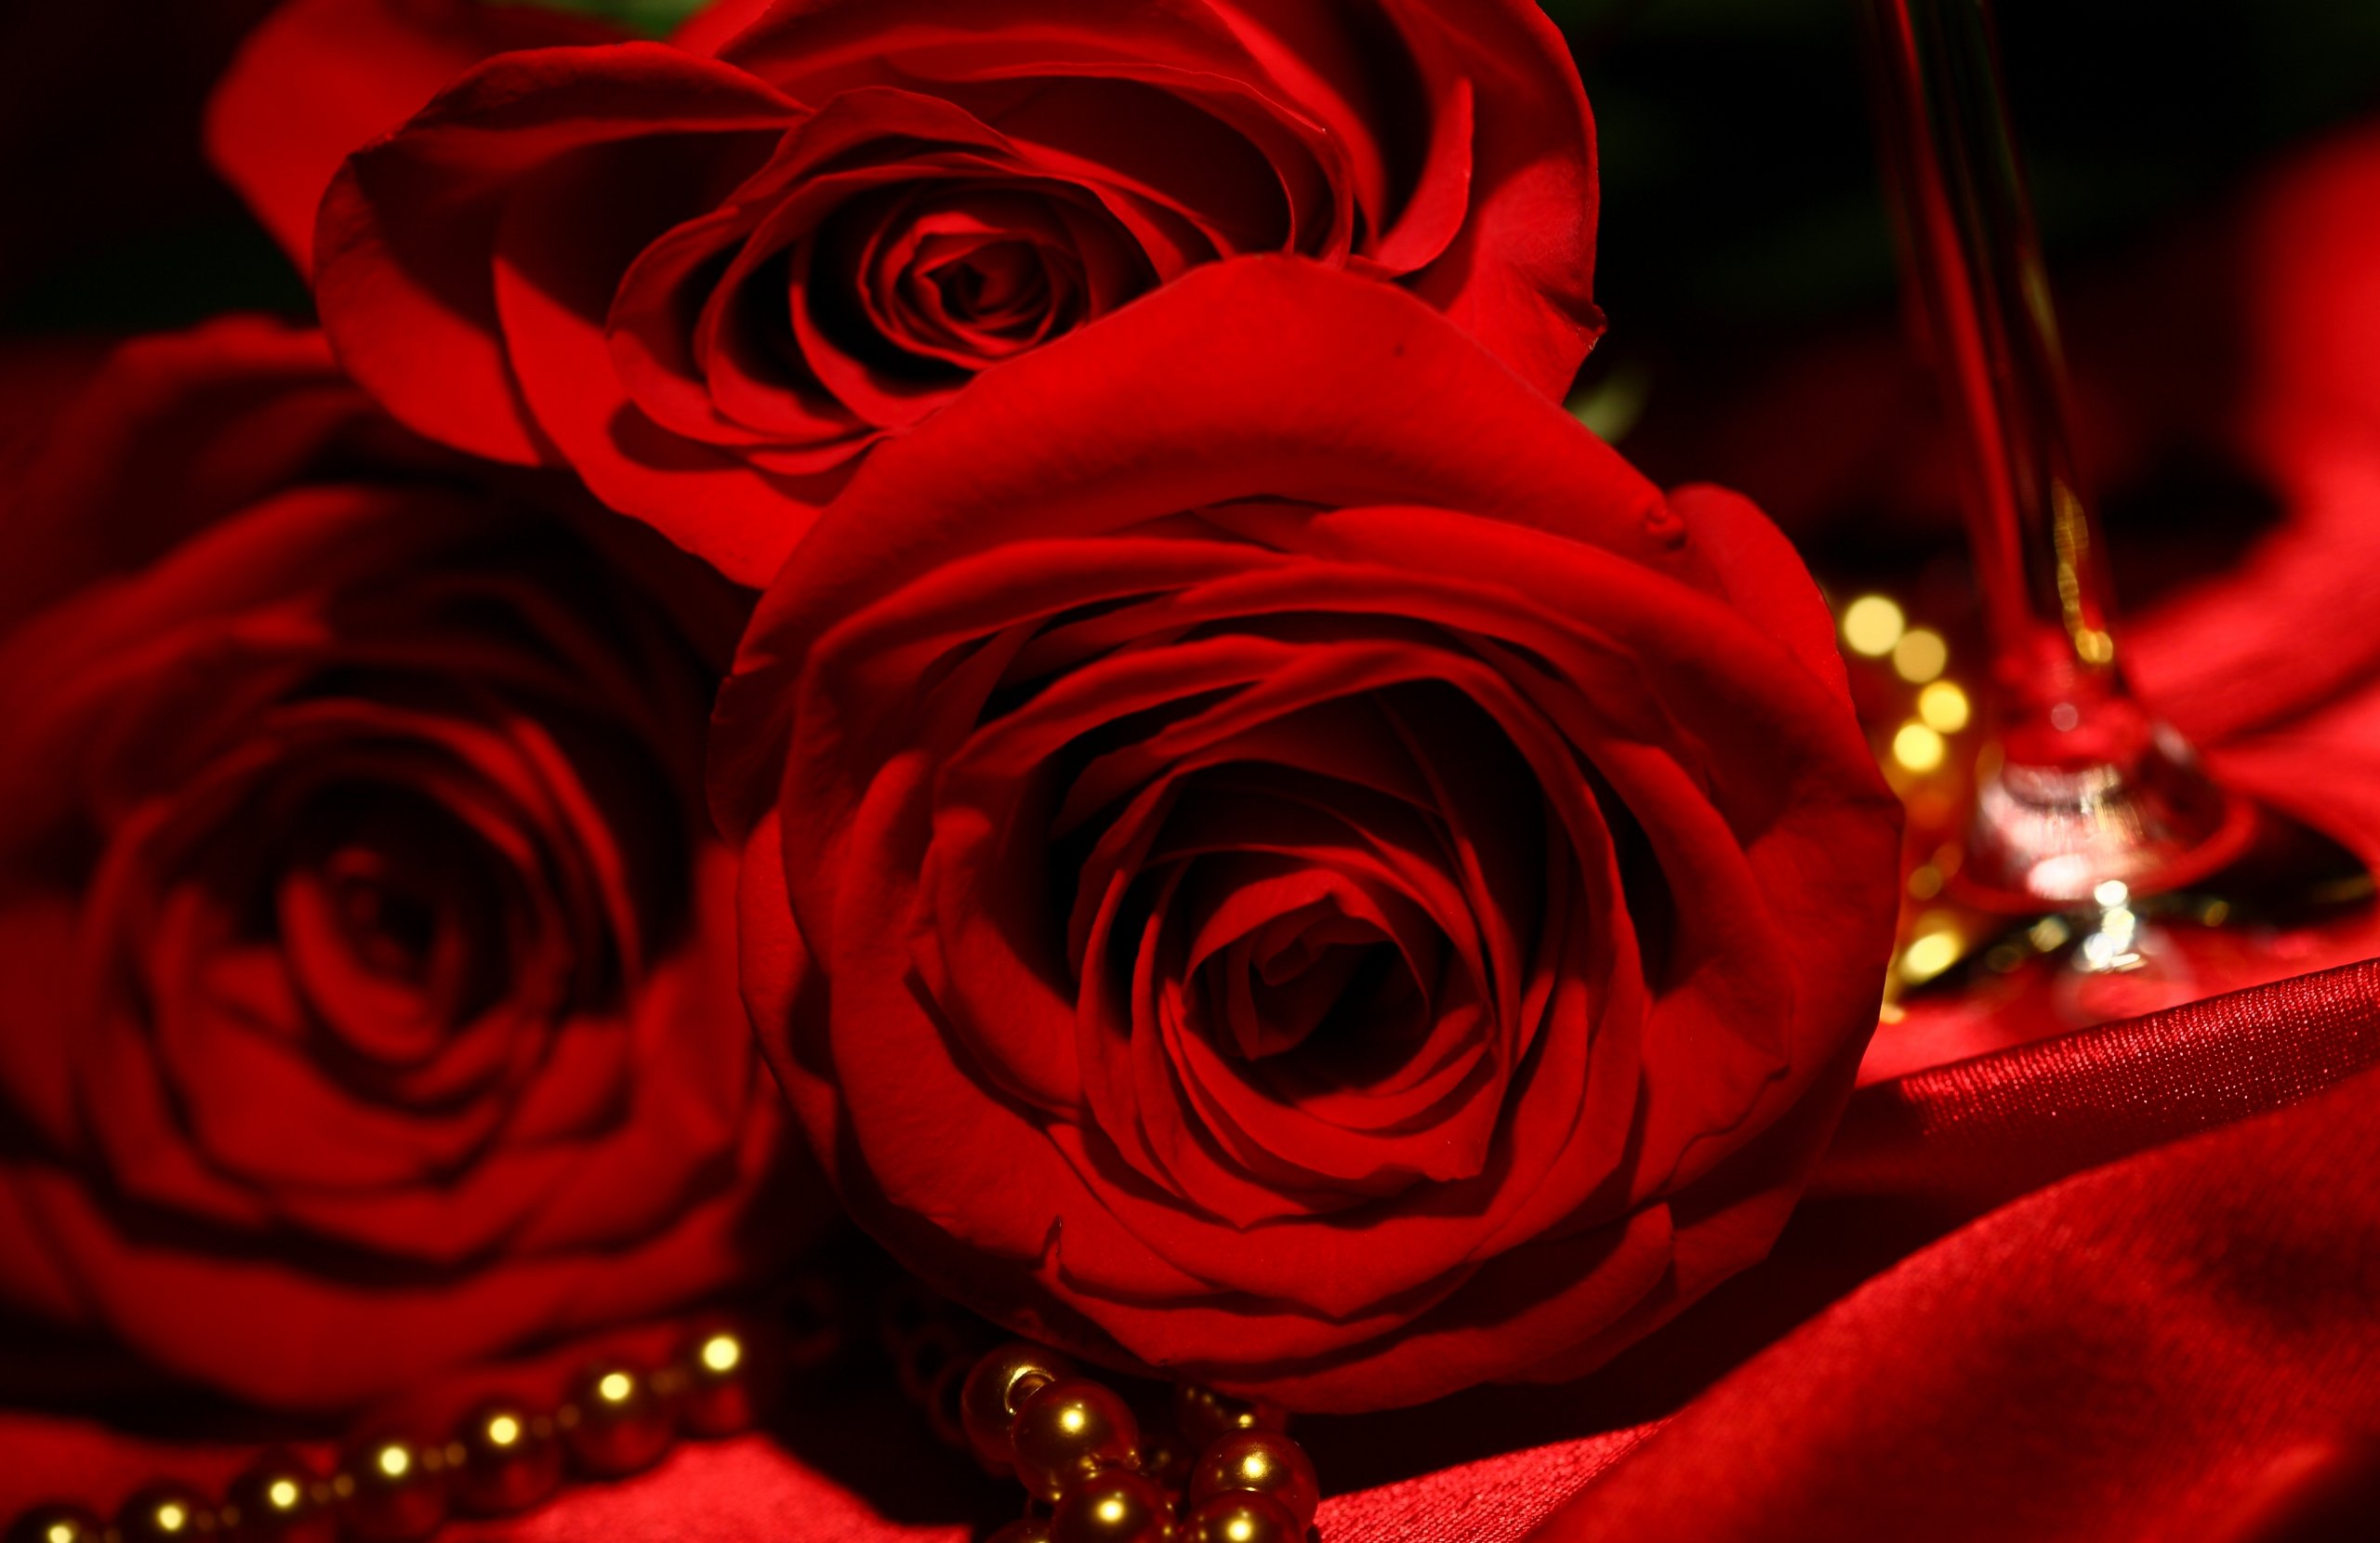 Red Roses Backgrounds   Wallpaper High Definition High Quality 2560x1660